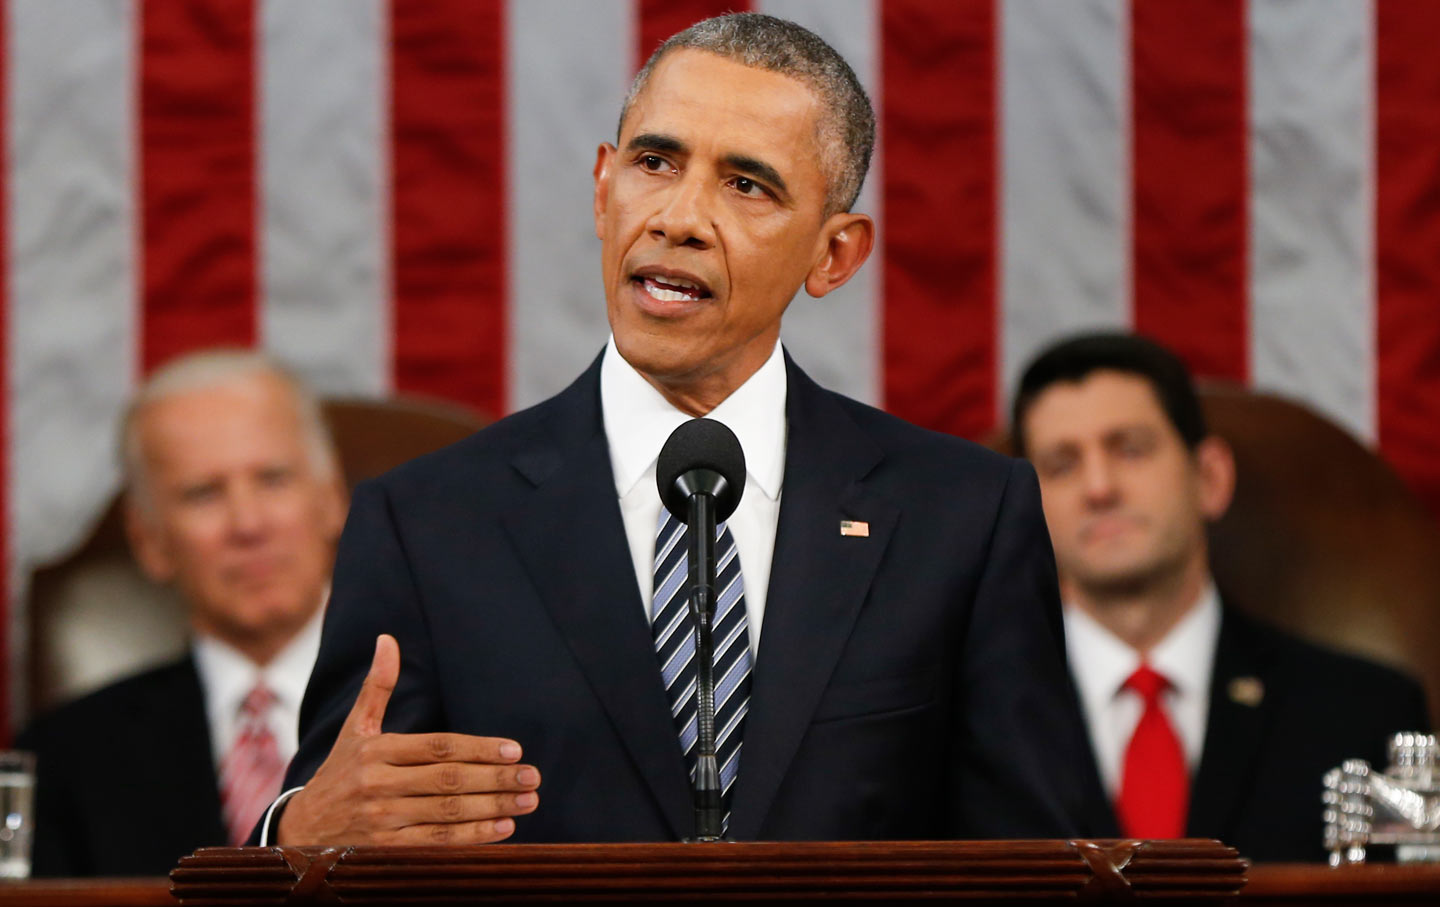 Obama gives State of the Union